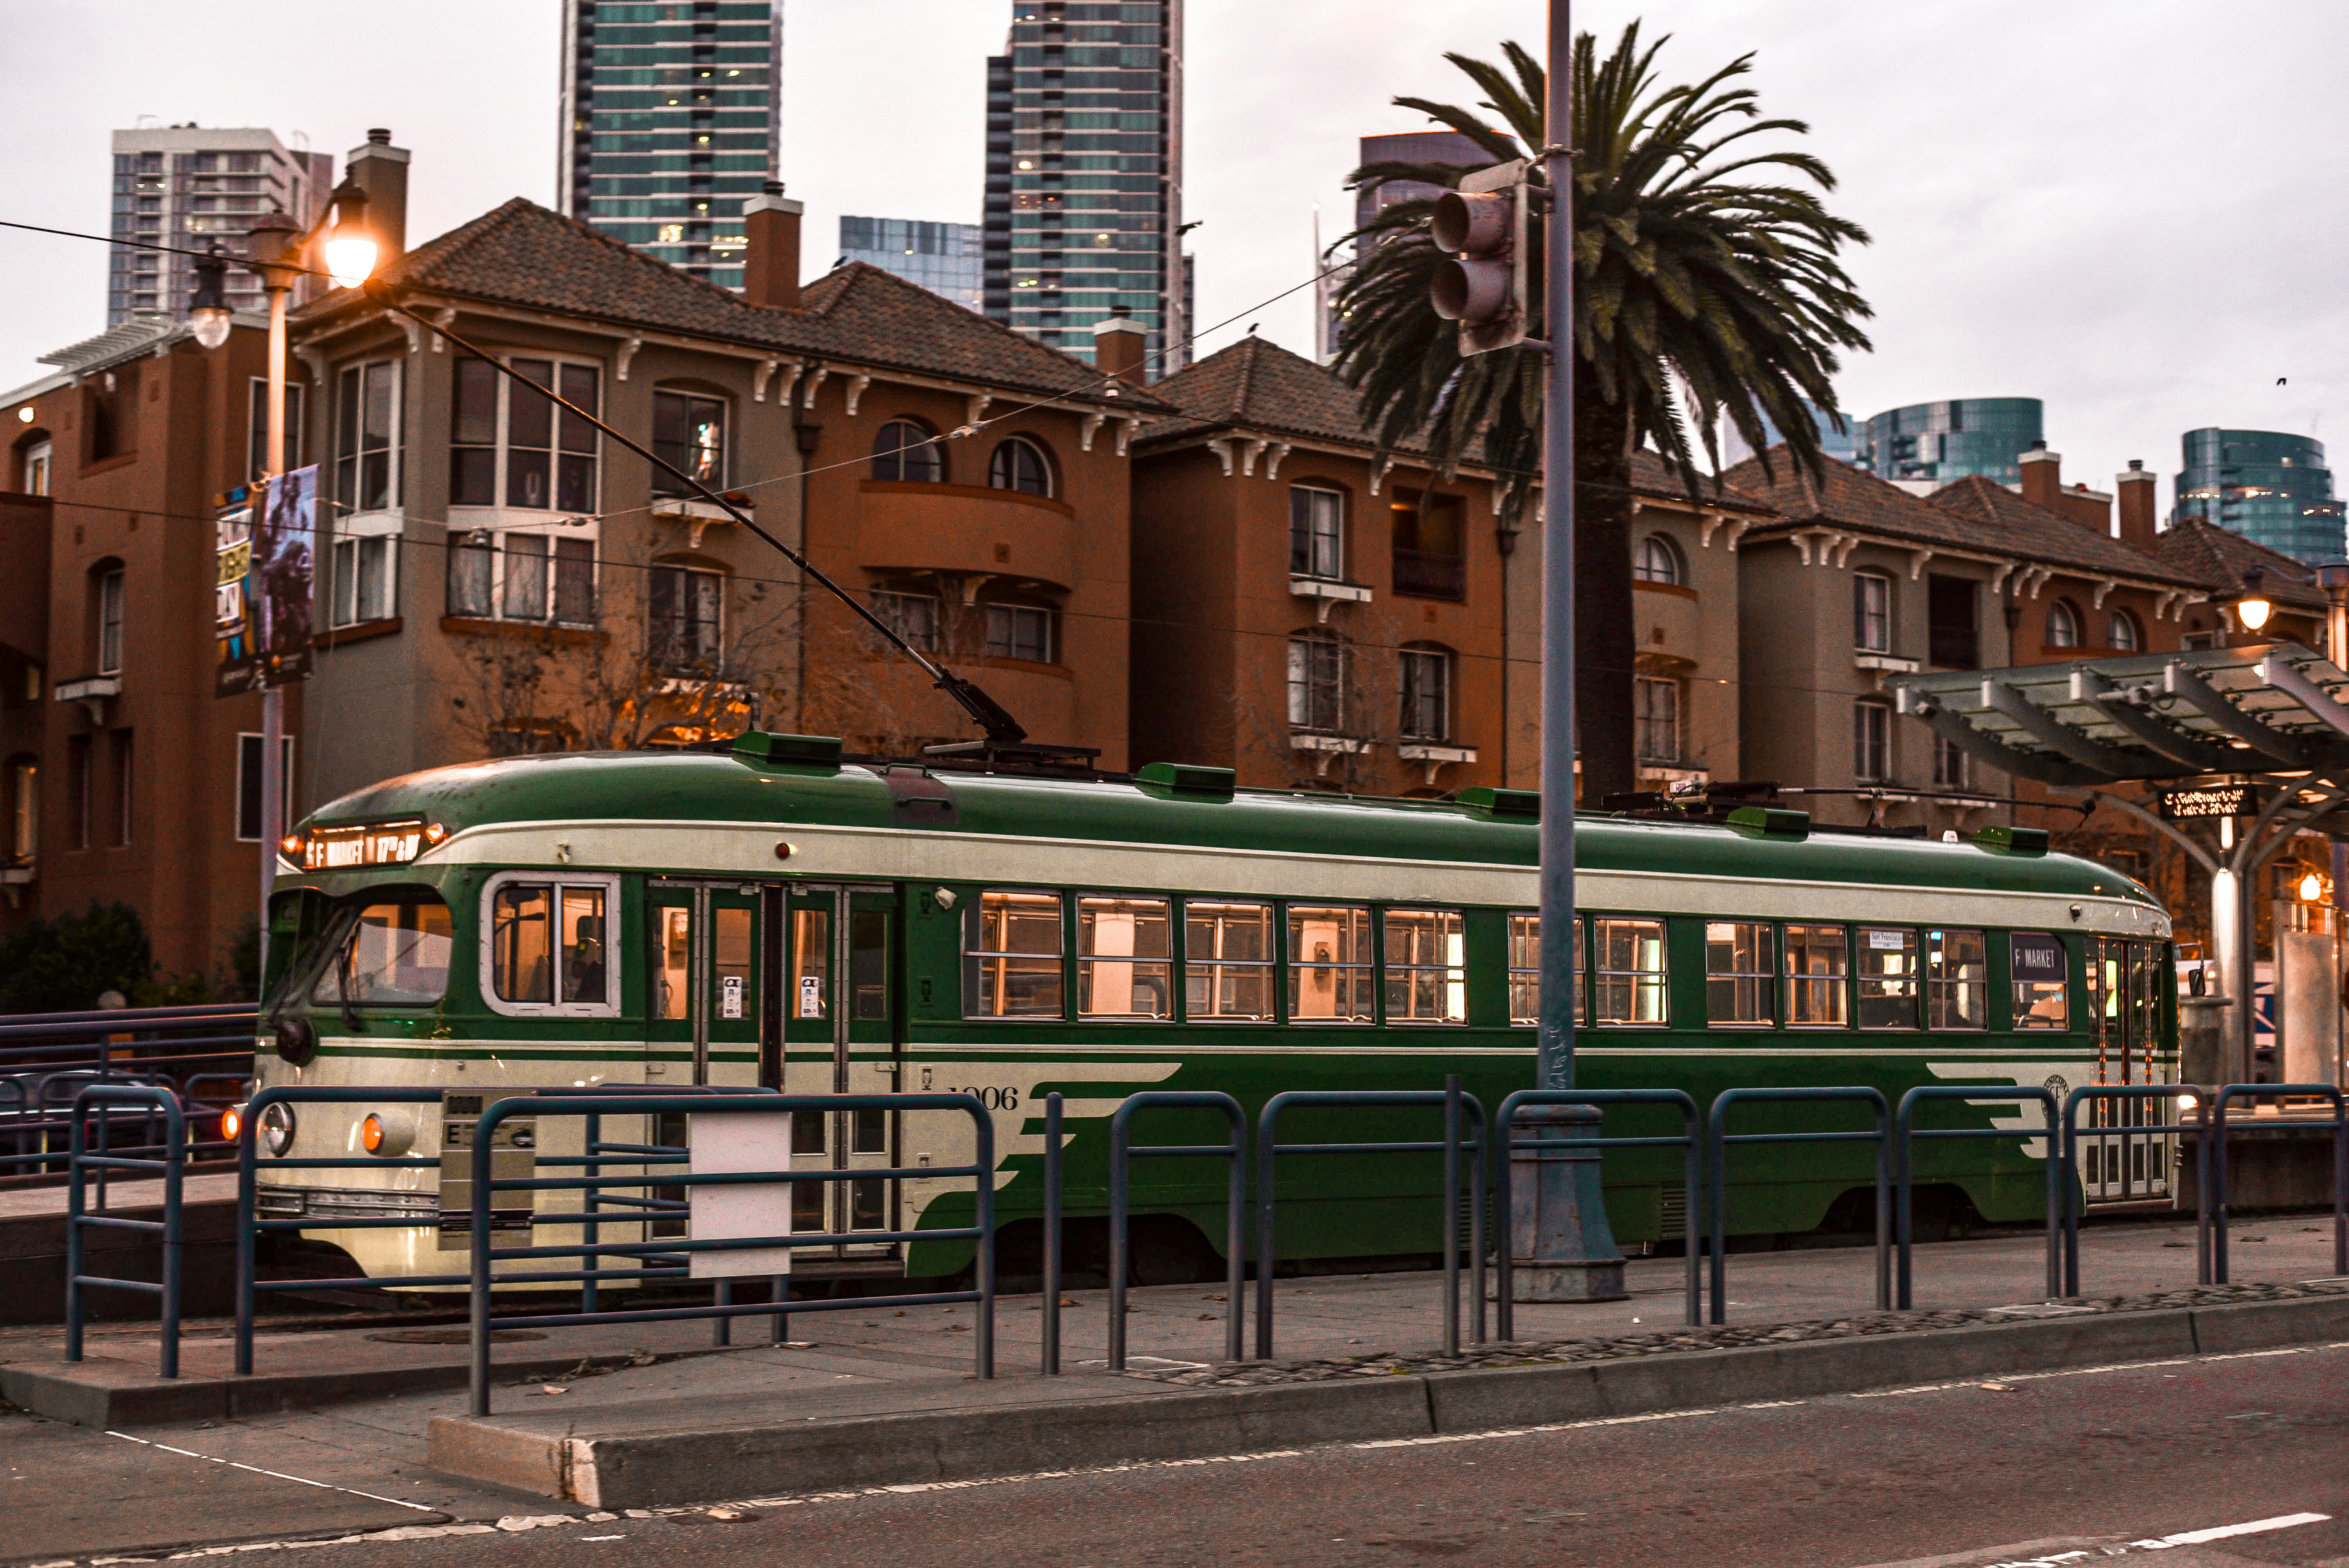 Rustic vibes in the streets of San Francisco accompanied by a passing tram.